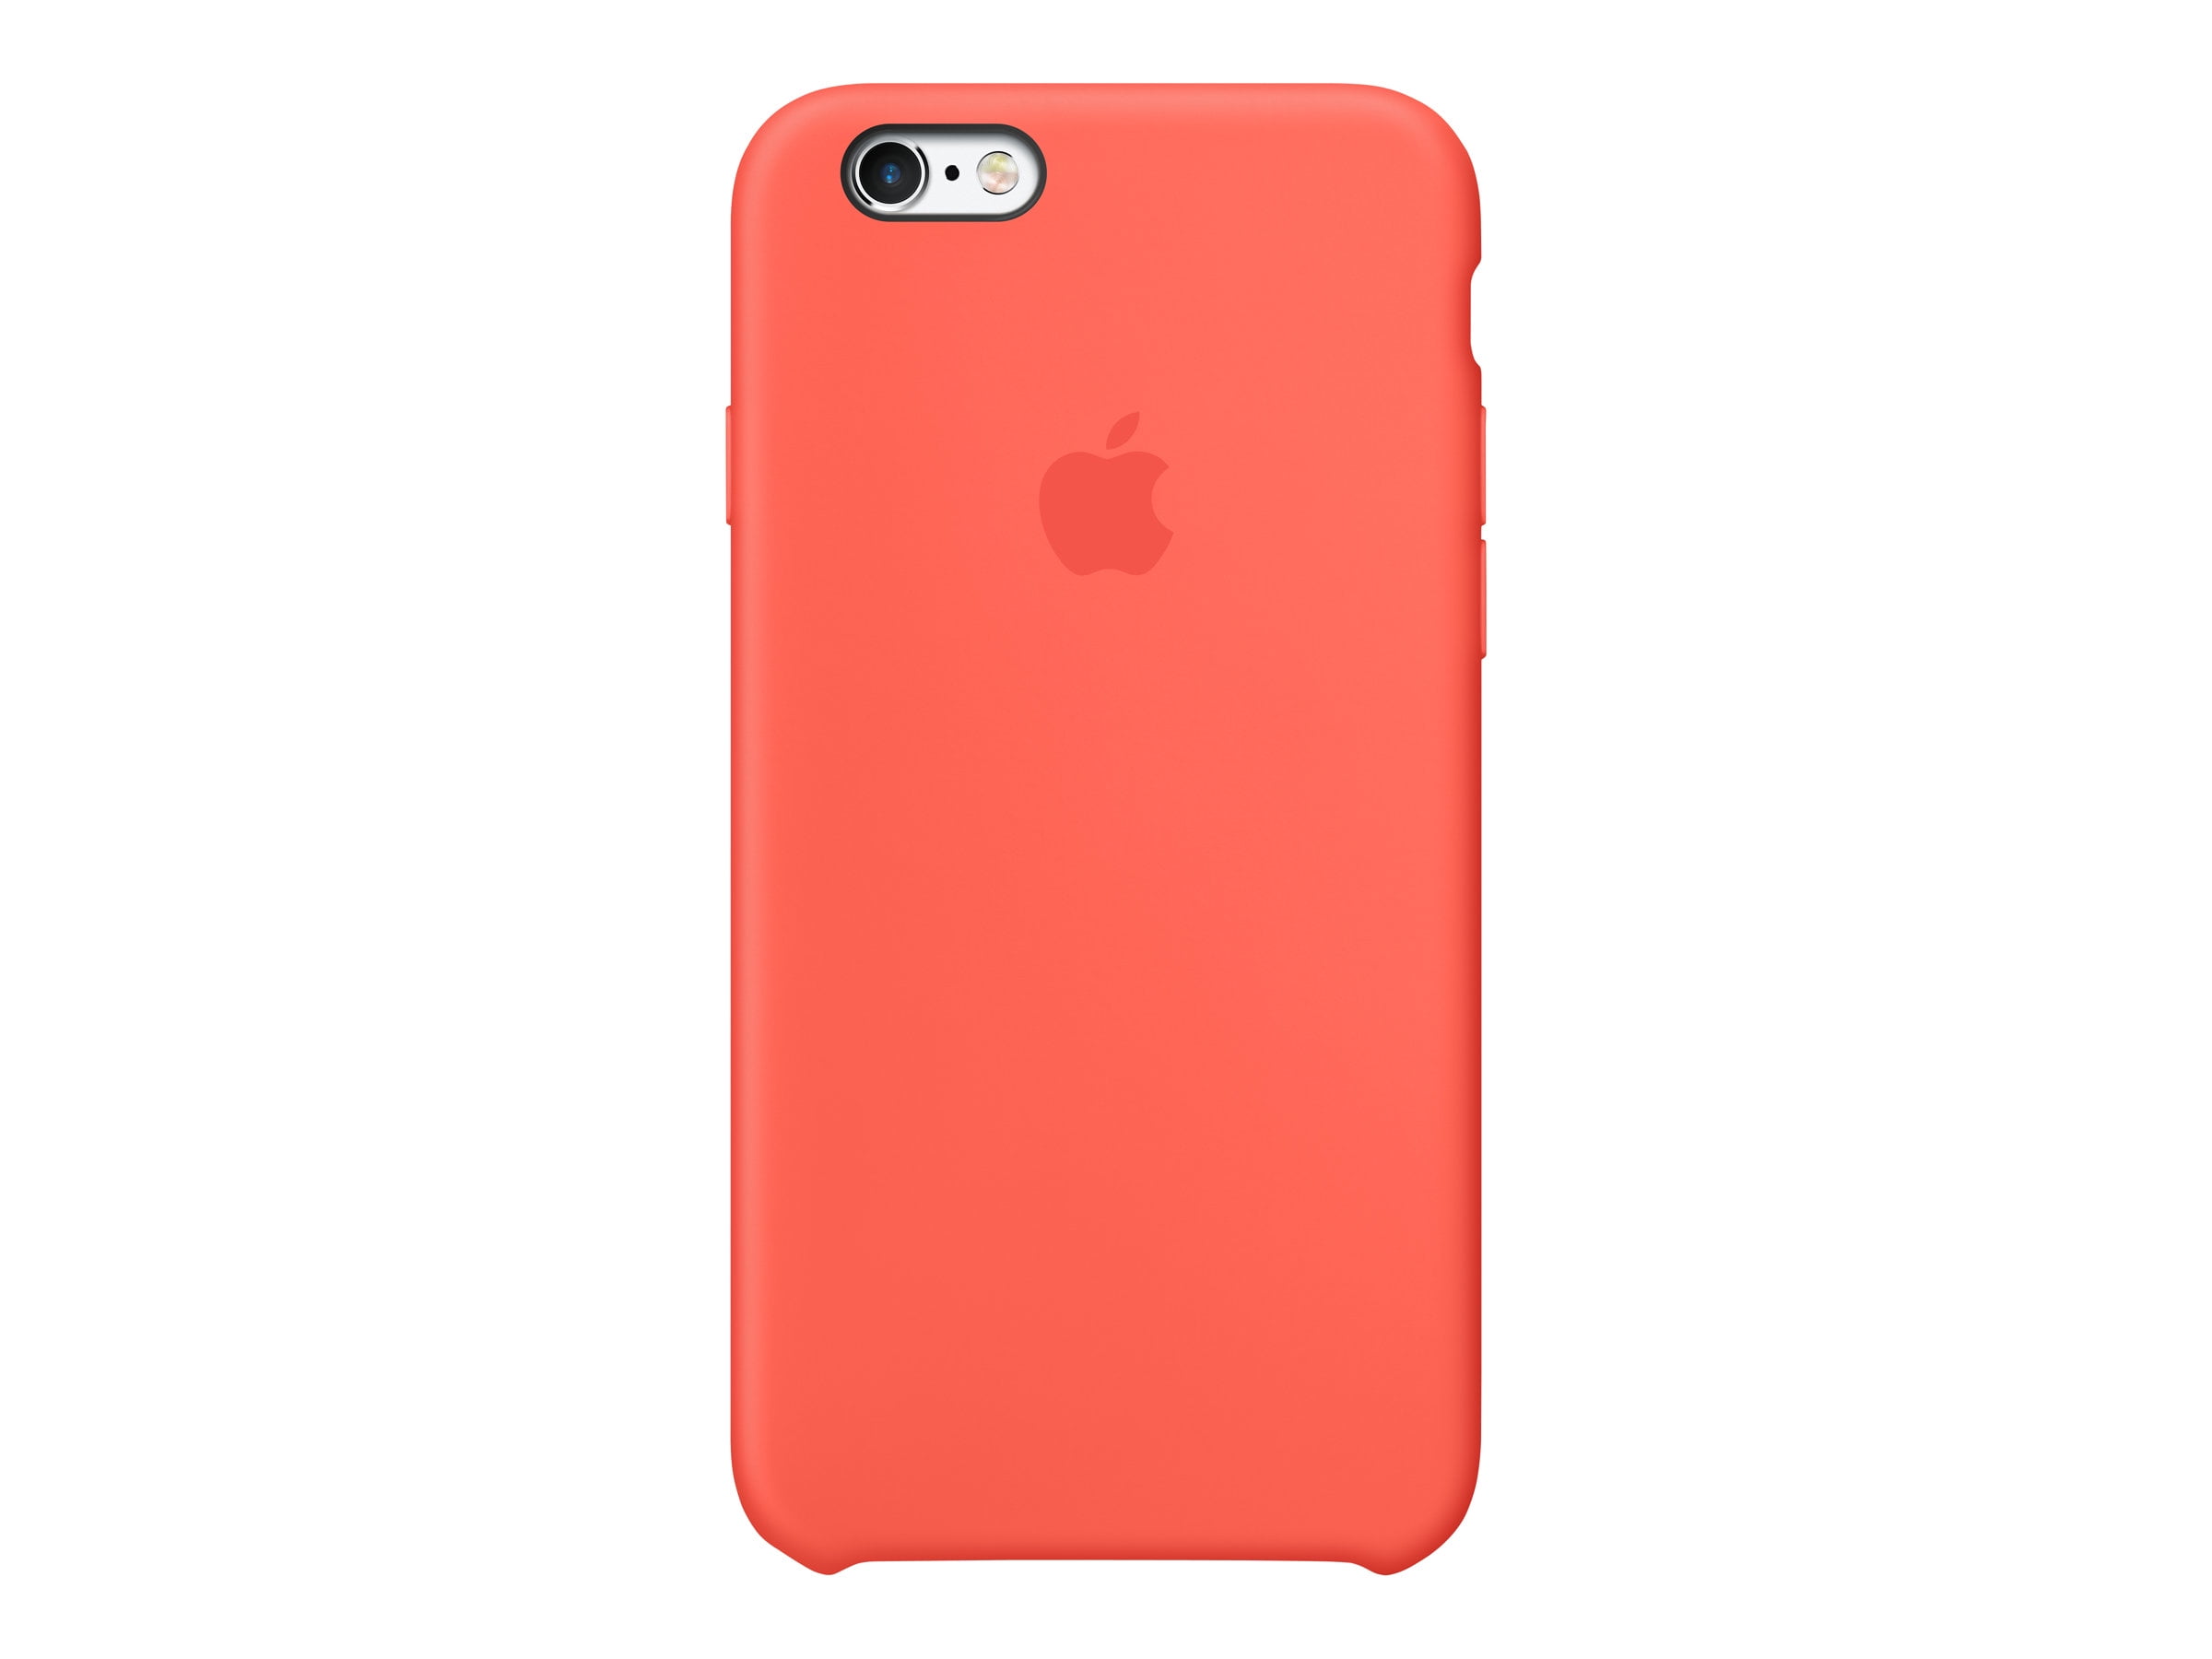 Apple Silicone Case for iPhone 6s - Apricot - Walmart.com